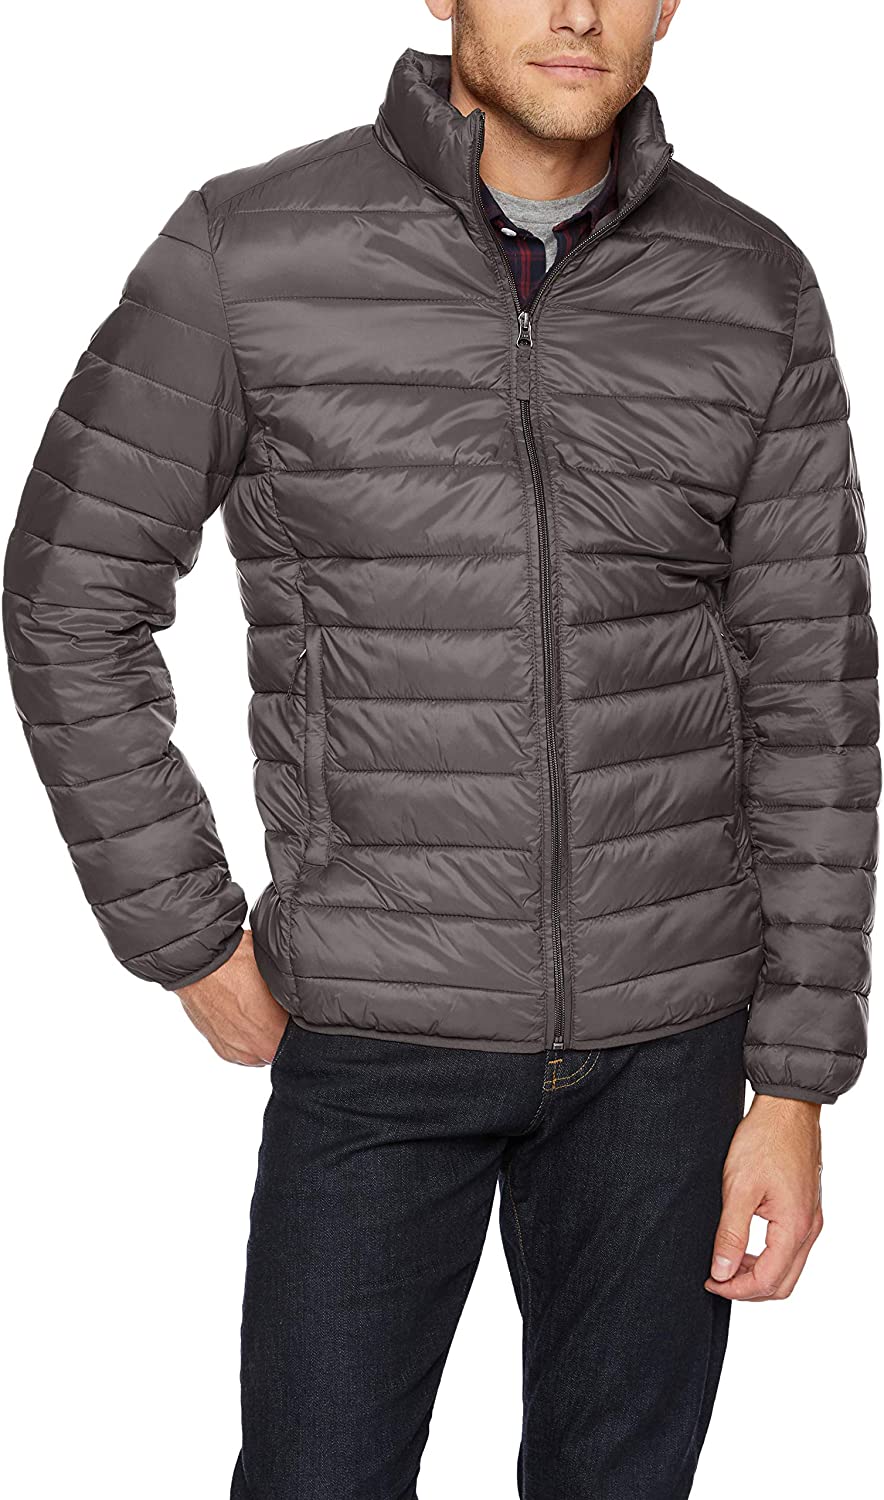 Generic Mens Stand Collar Quilted Lightweight Puffer Down Jacket Coat 